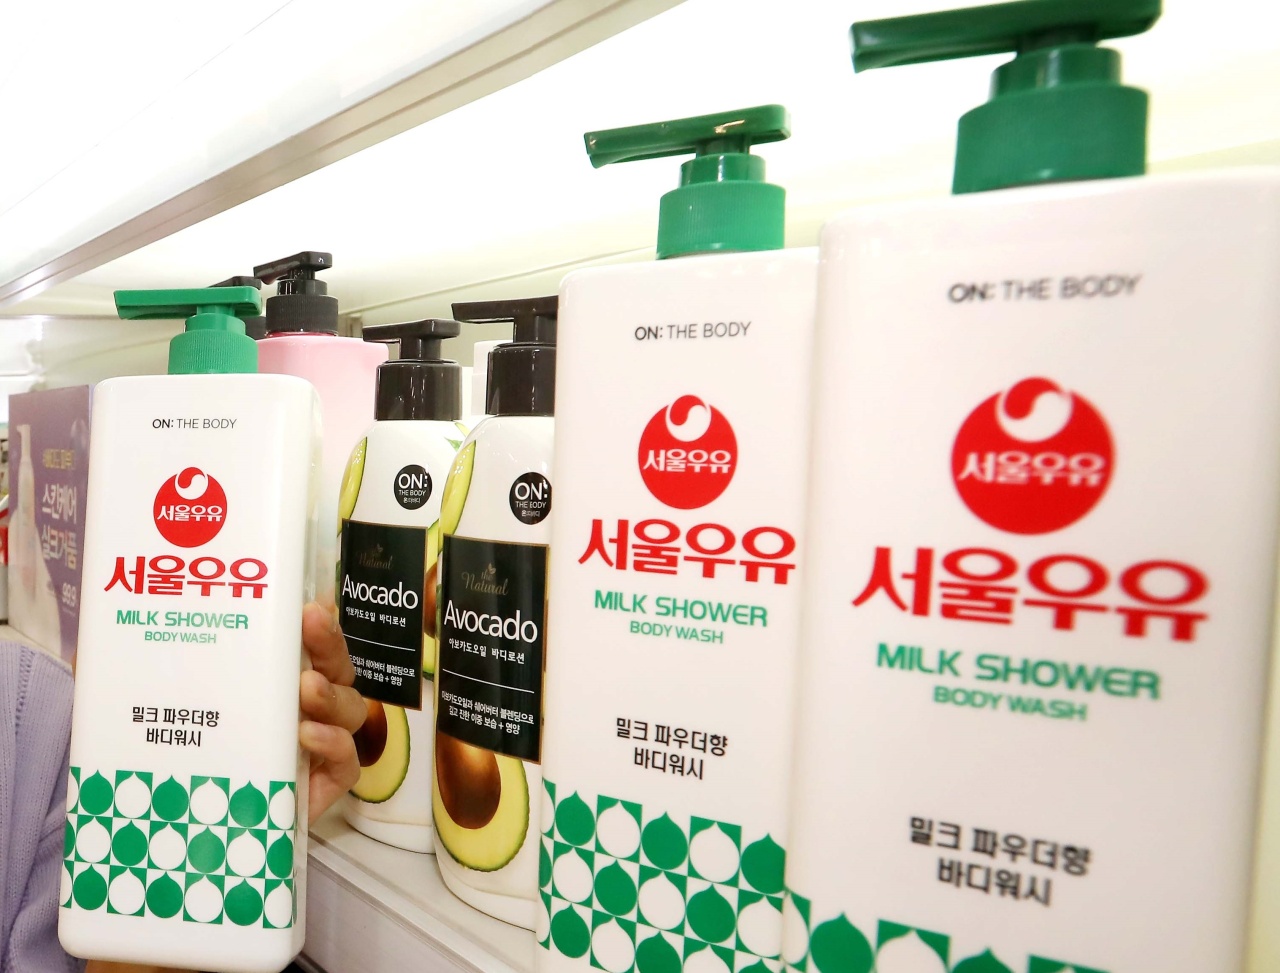 Supermarket chain Homeplus released a body wash inspired by Seoul Milk earlier this month. (Homeplus)